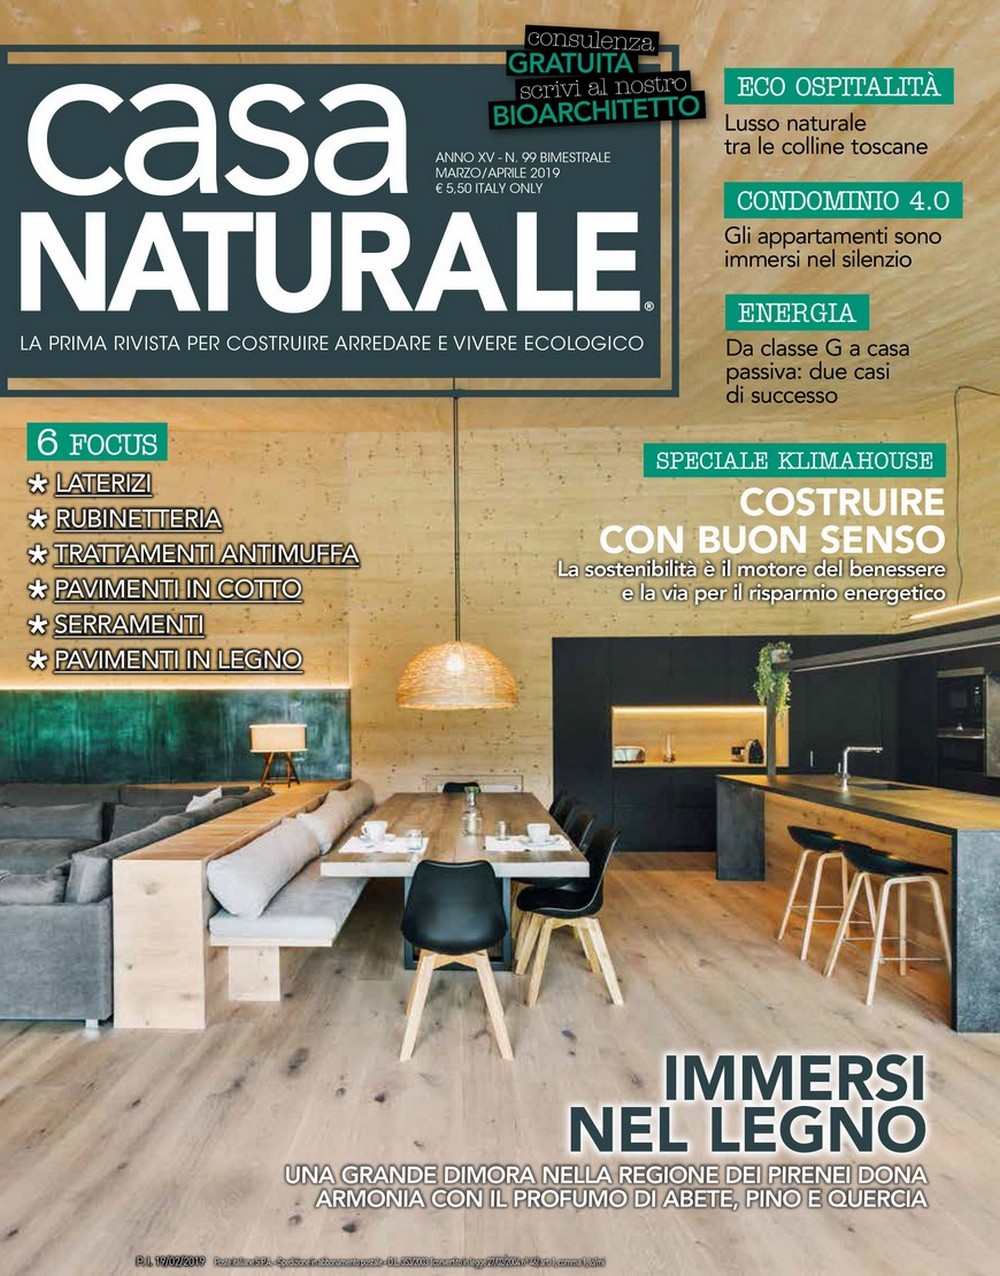 Design Your Home With The Best Interior Design Magazines At Cersaie